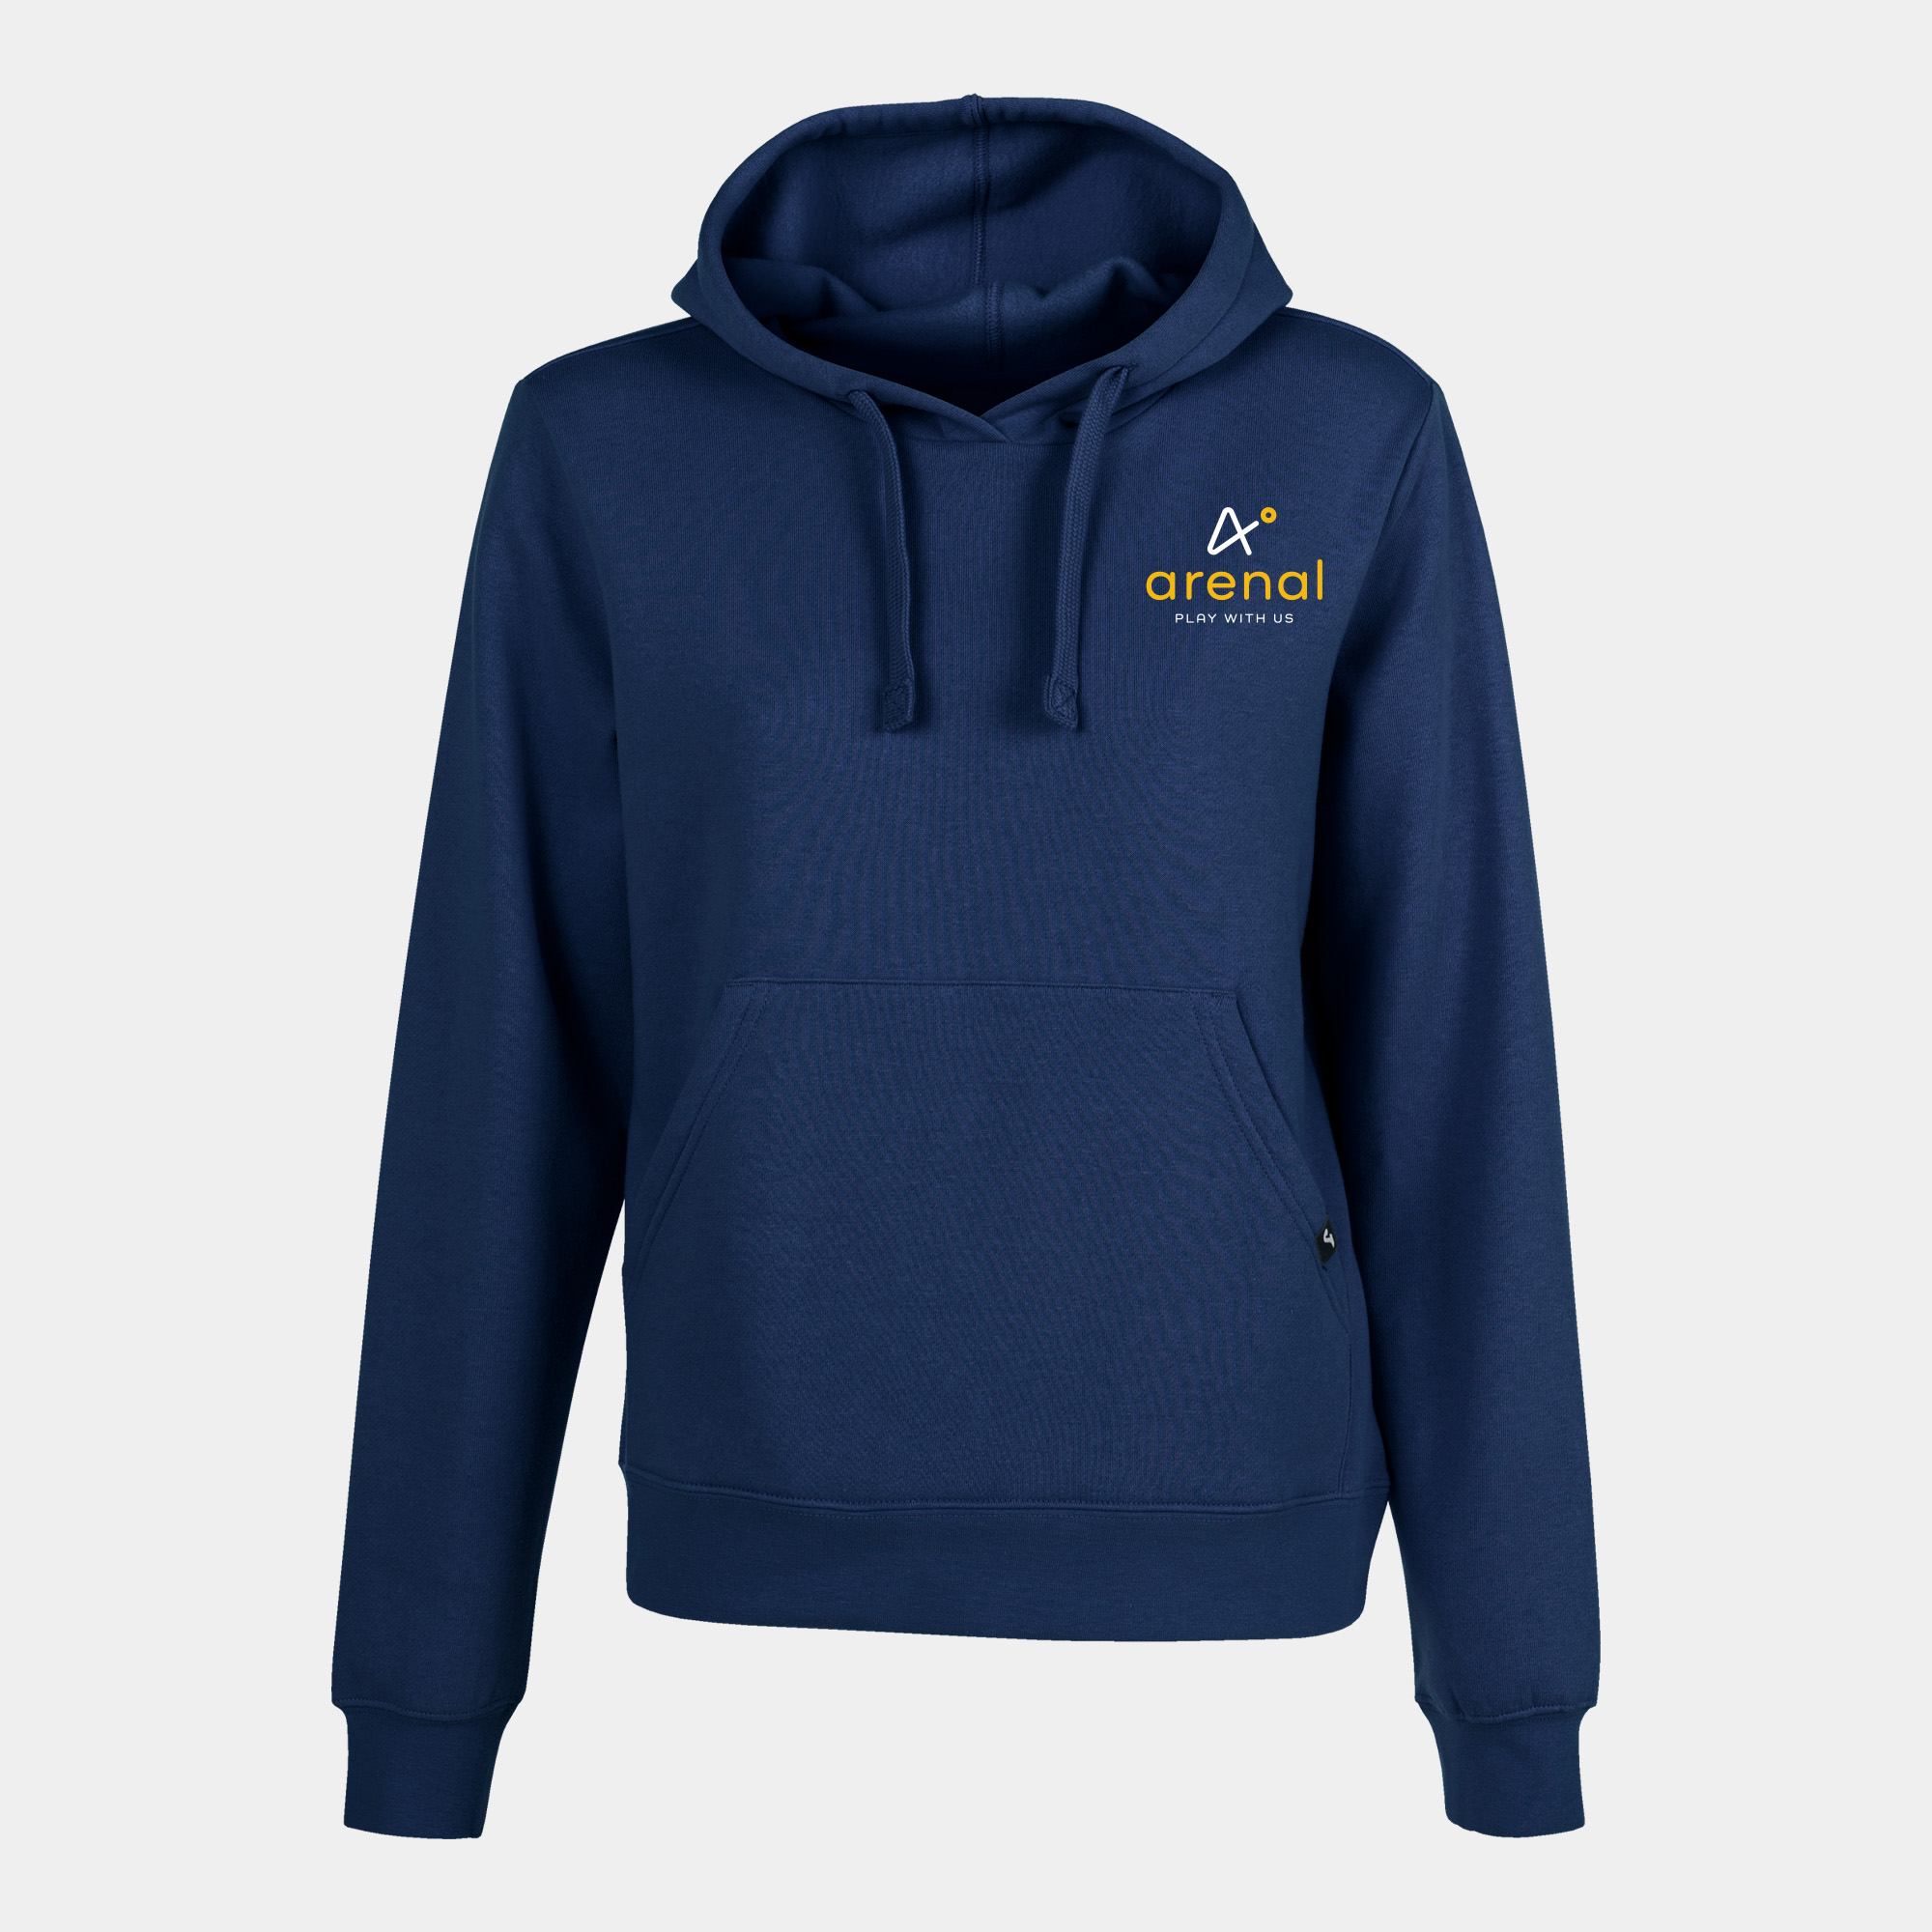 Arenal - Hooded sweater woman Montana navy blue